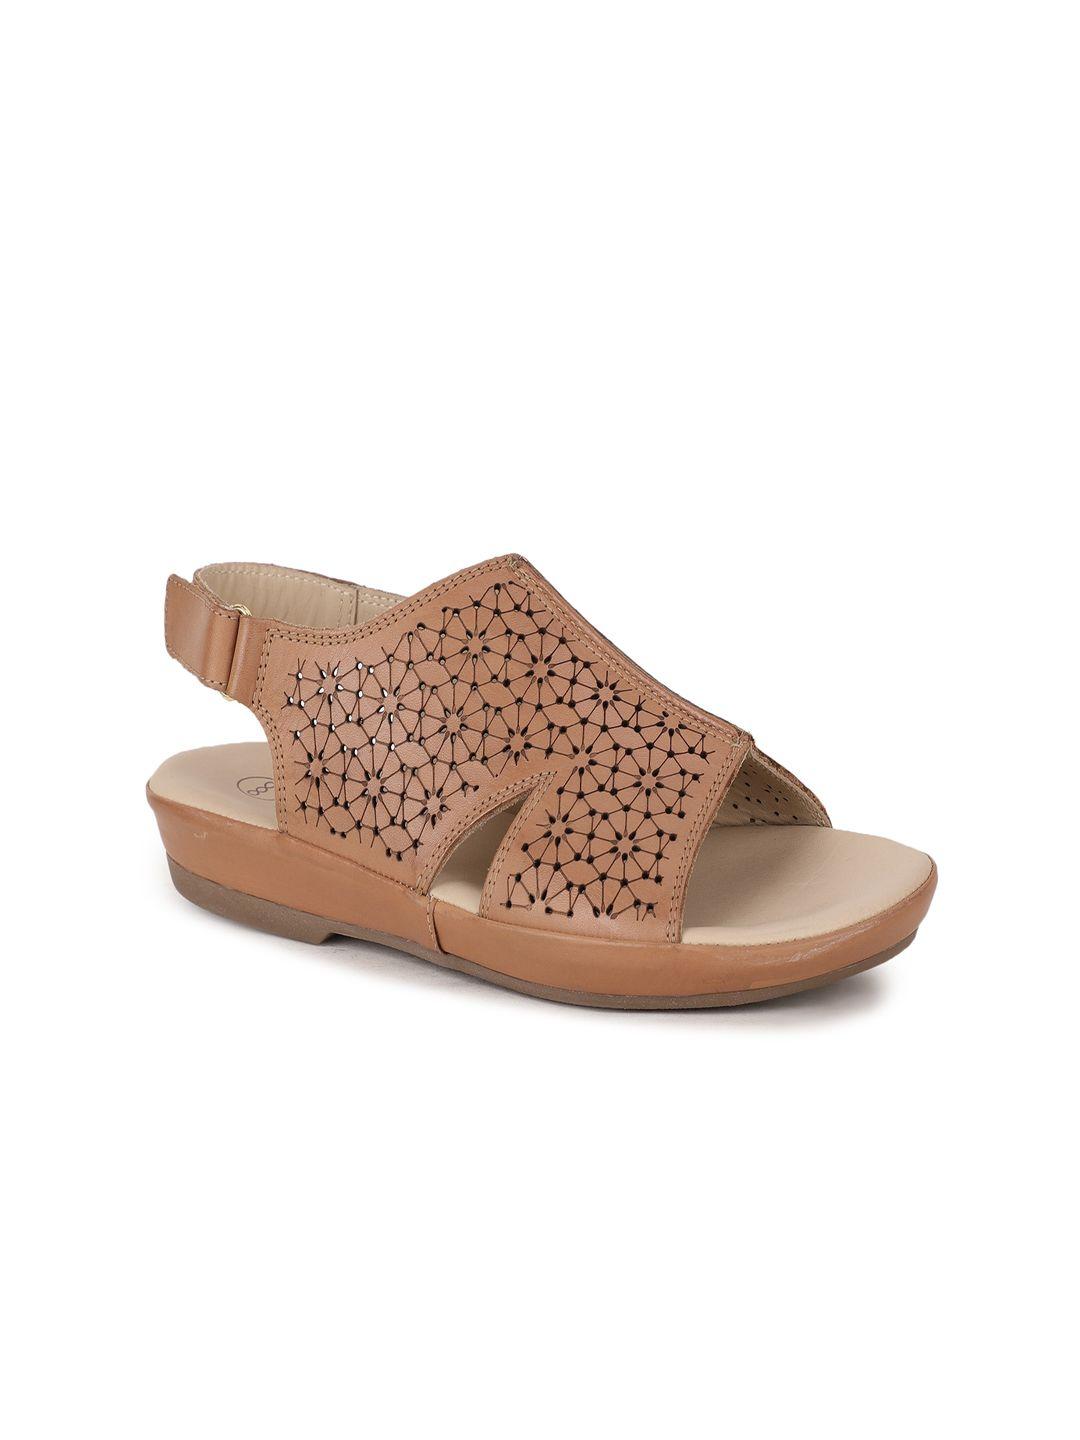 hush-puppies-women-brown-solid-leather-open-toe-flats-with-laser-cuts